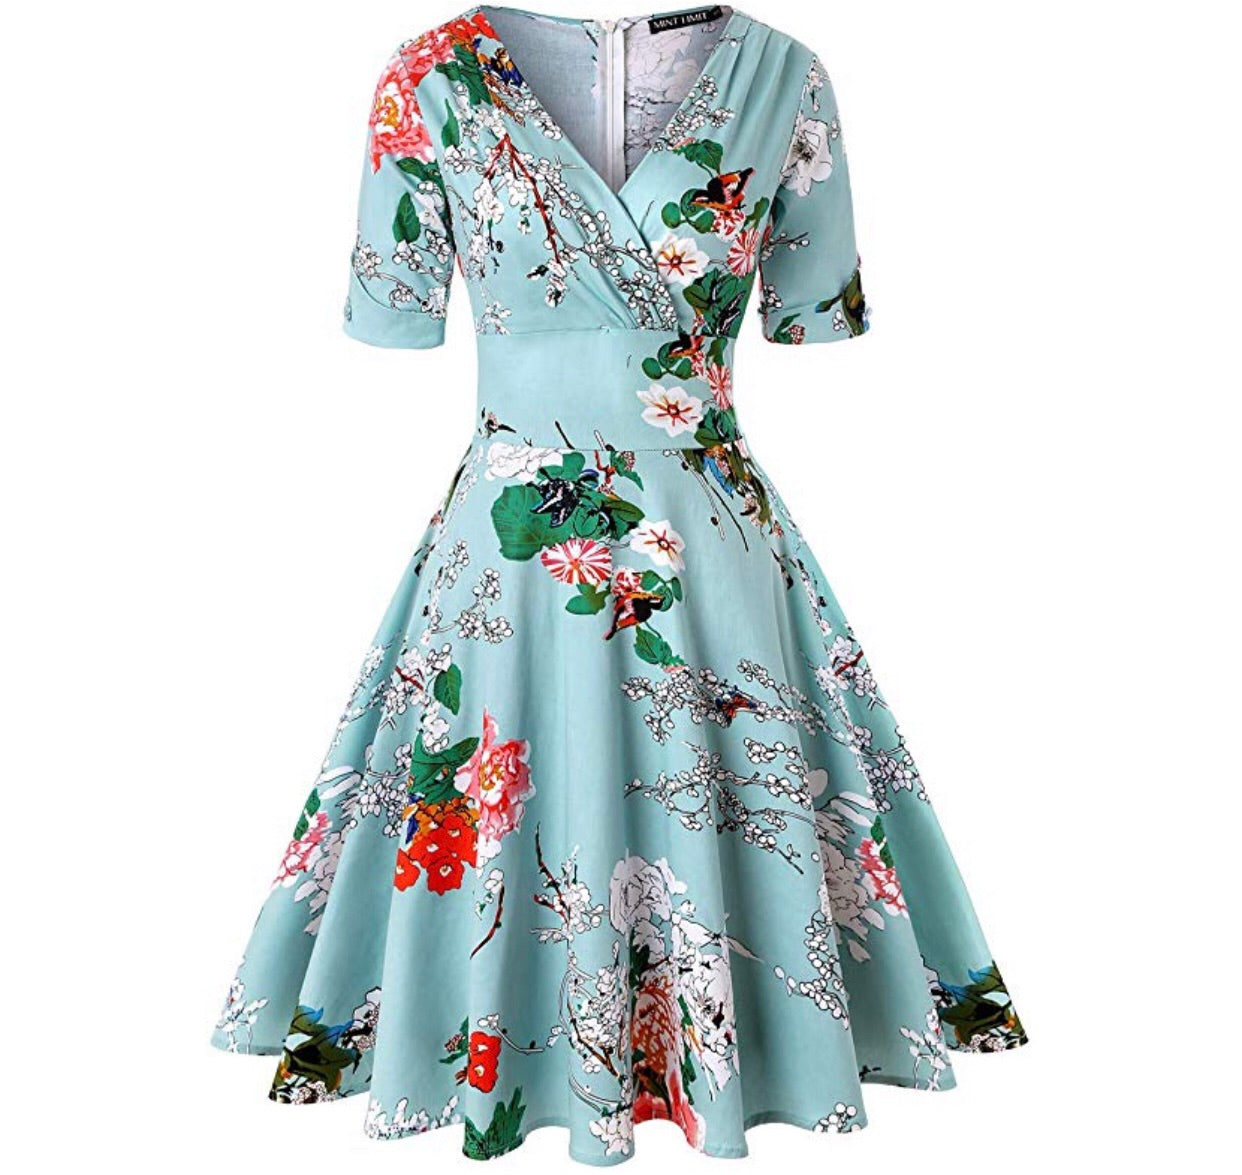 V-Neck Retro Look Swing Dress, Sizes Small - 2XLarge (US Sizes 4 - 22) Floral Blue